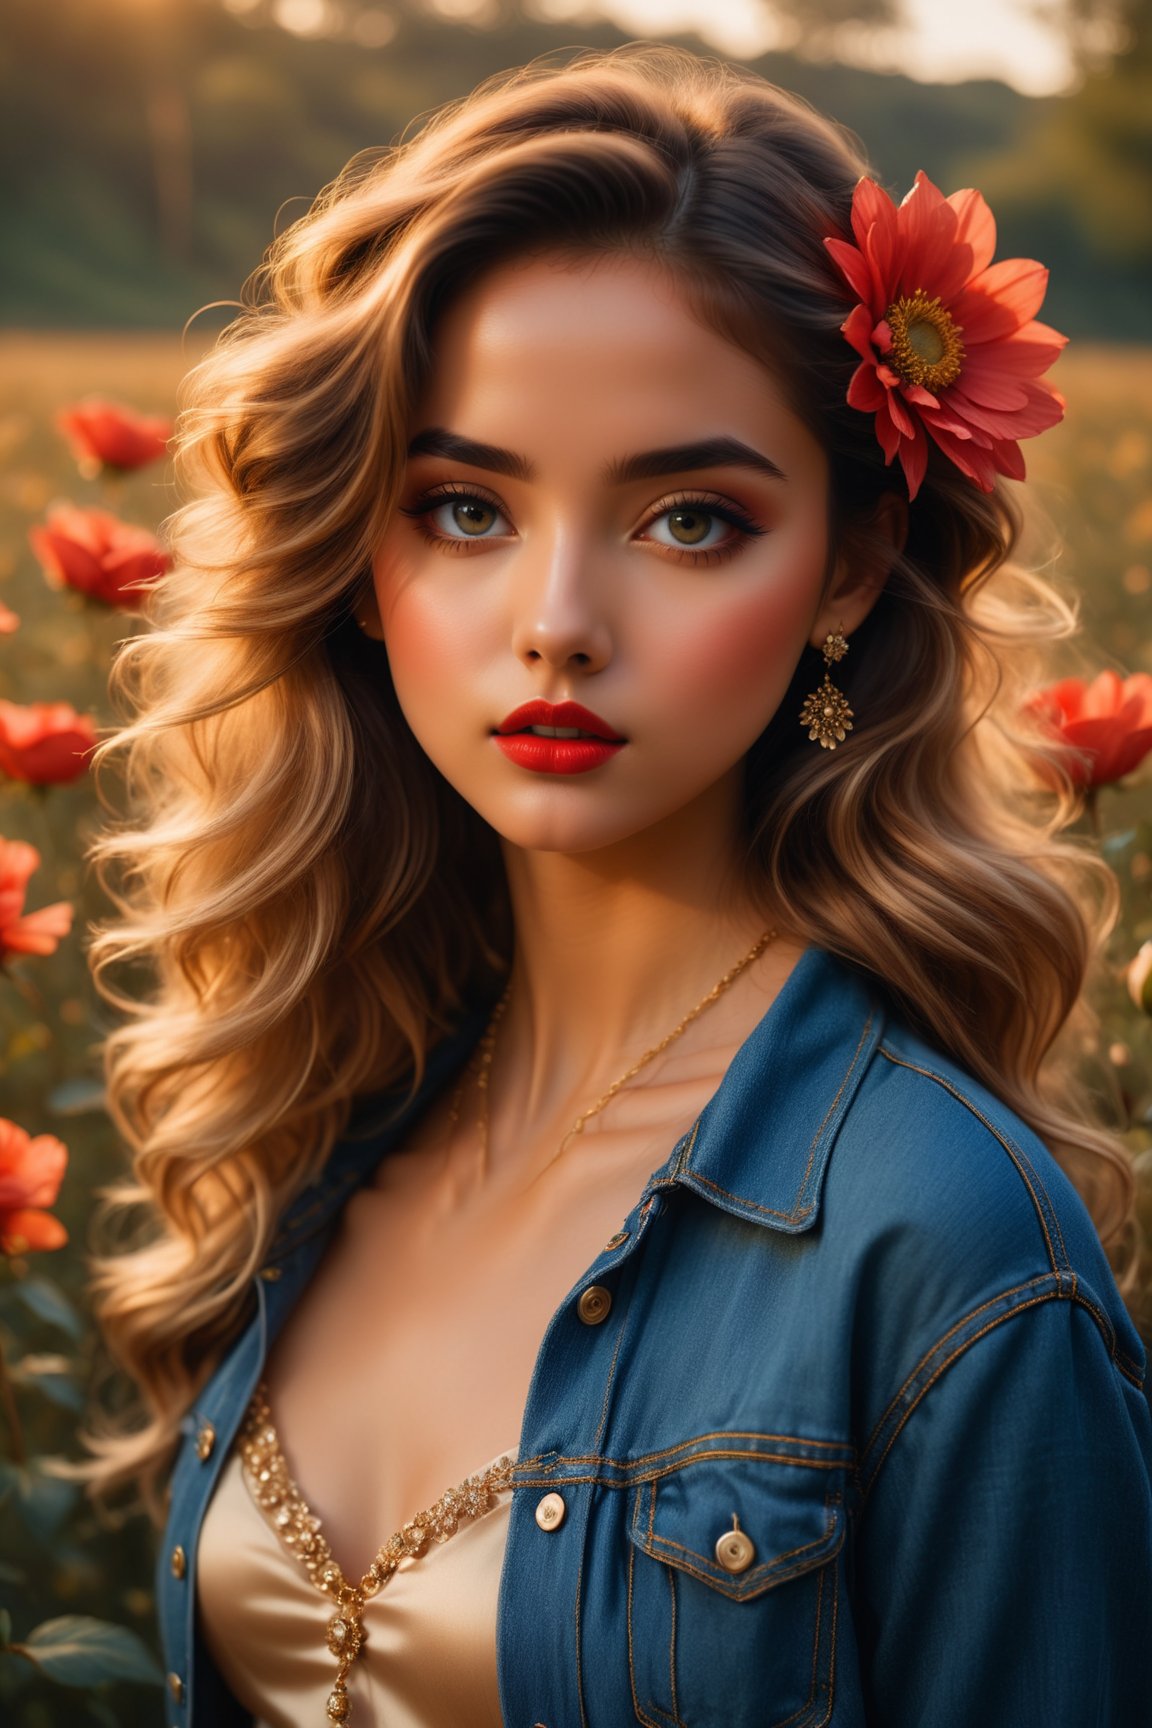 (best quality,4k,highres,masterpiece:1.2),ultra-detailed,(realistic:1.37)
cinematic film still, Raw Photo of 1girl, blurry, denim, flower, hair flower, hair ornament, lips, long hair, looking at viewer, midriff, navel, red flower, solo, gorgeous, film grain, close-up of face, dreamy atmosphere, soft lighting, vintage aesthetic, artsy composition, natural beauty, youthful charm, delicate features, expressive eyes, tousled hair, feminine allure, confident pose, serene expression, golden hour lighting, subtle color grading, ethereal appearance, whimsical vibes, mysterious aura, romantic ambiance, tranquil mood, captivating gaze, cinematic flair, subtle bokeh effect, delicate jewelry, retro vibe